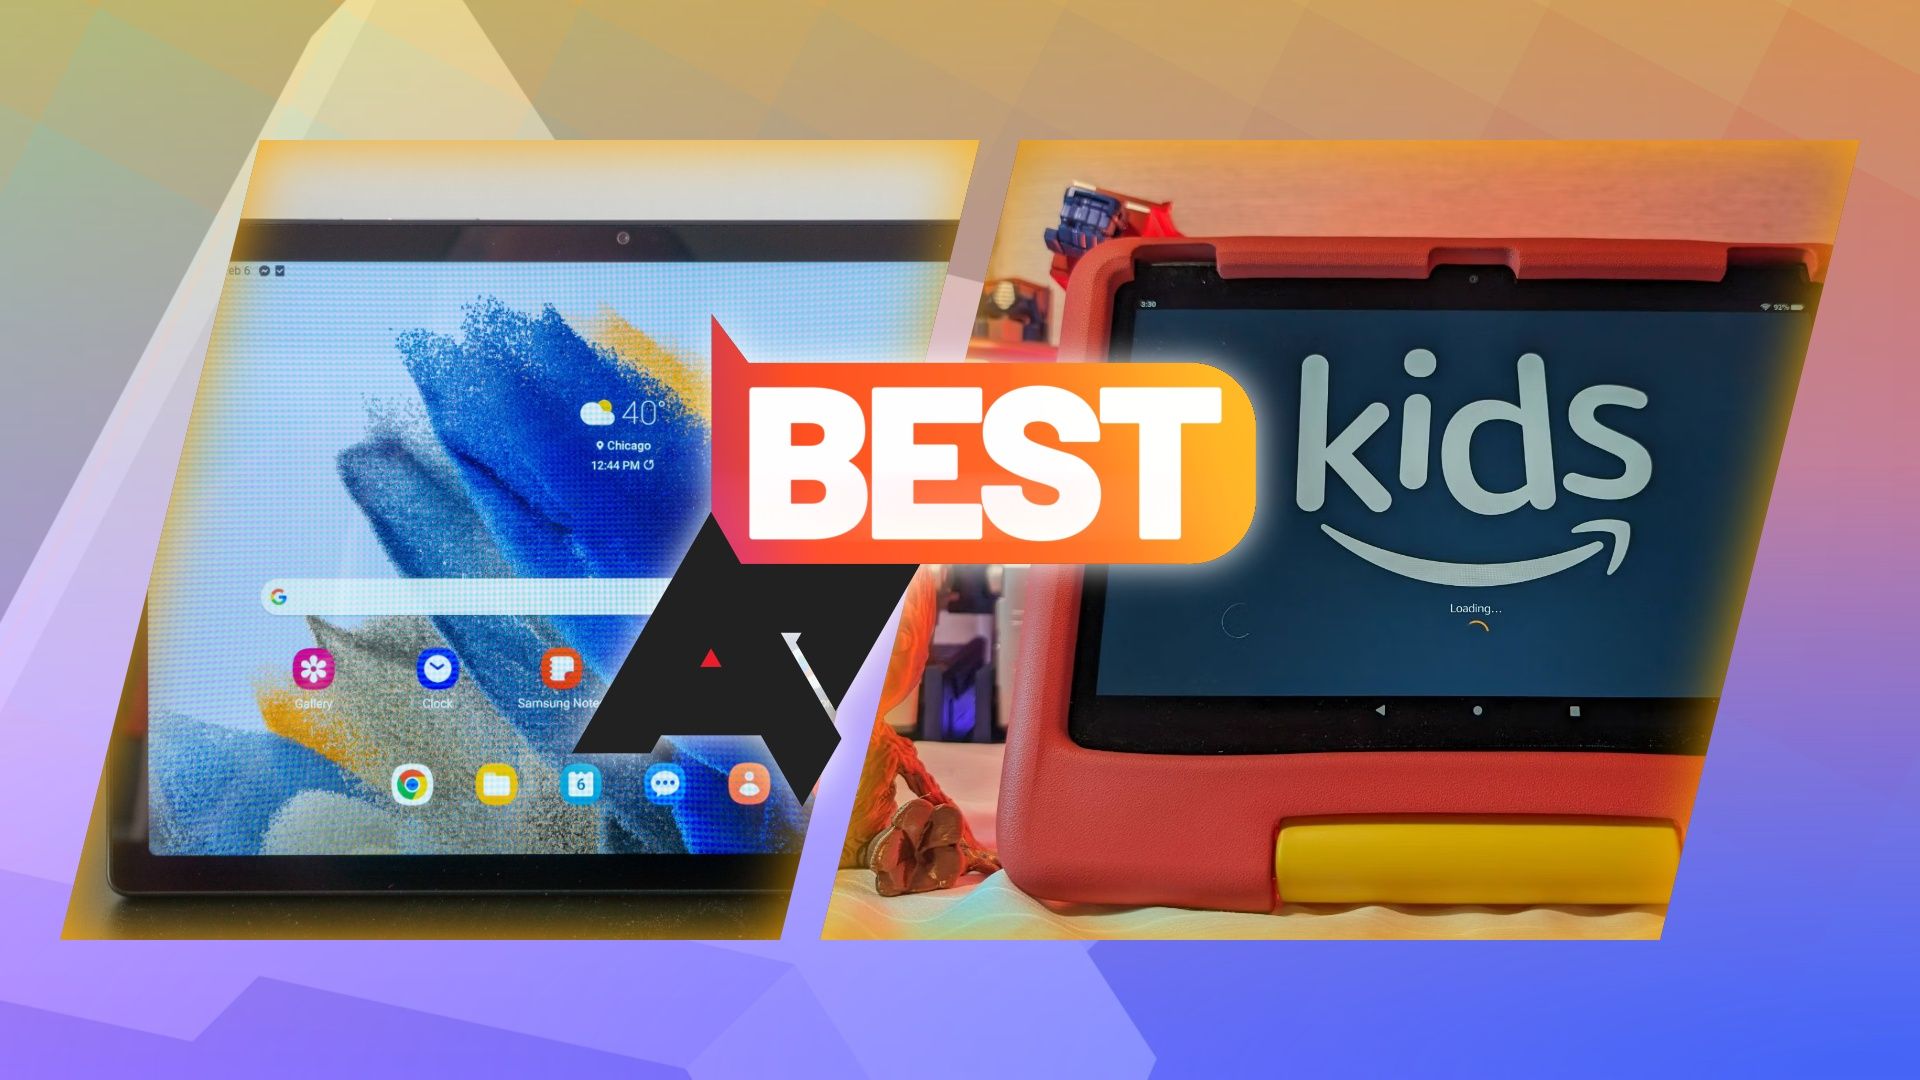 Photos of a Samsung tablet and an Amazon Fire Kids tablet, with an 'AP Best' logo in front